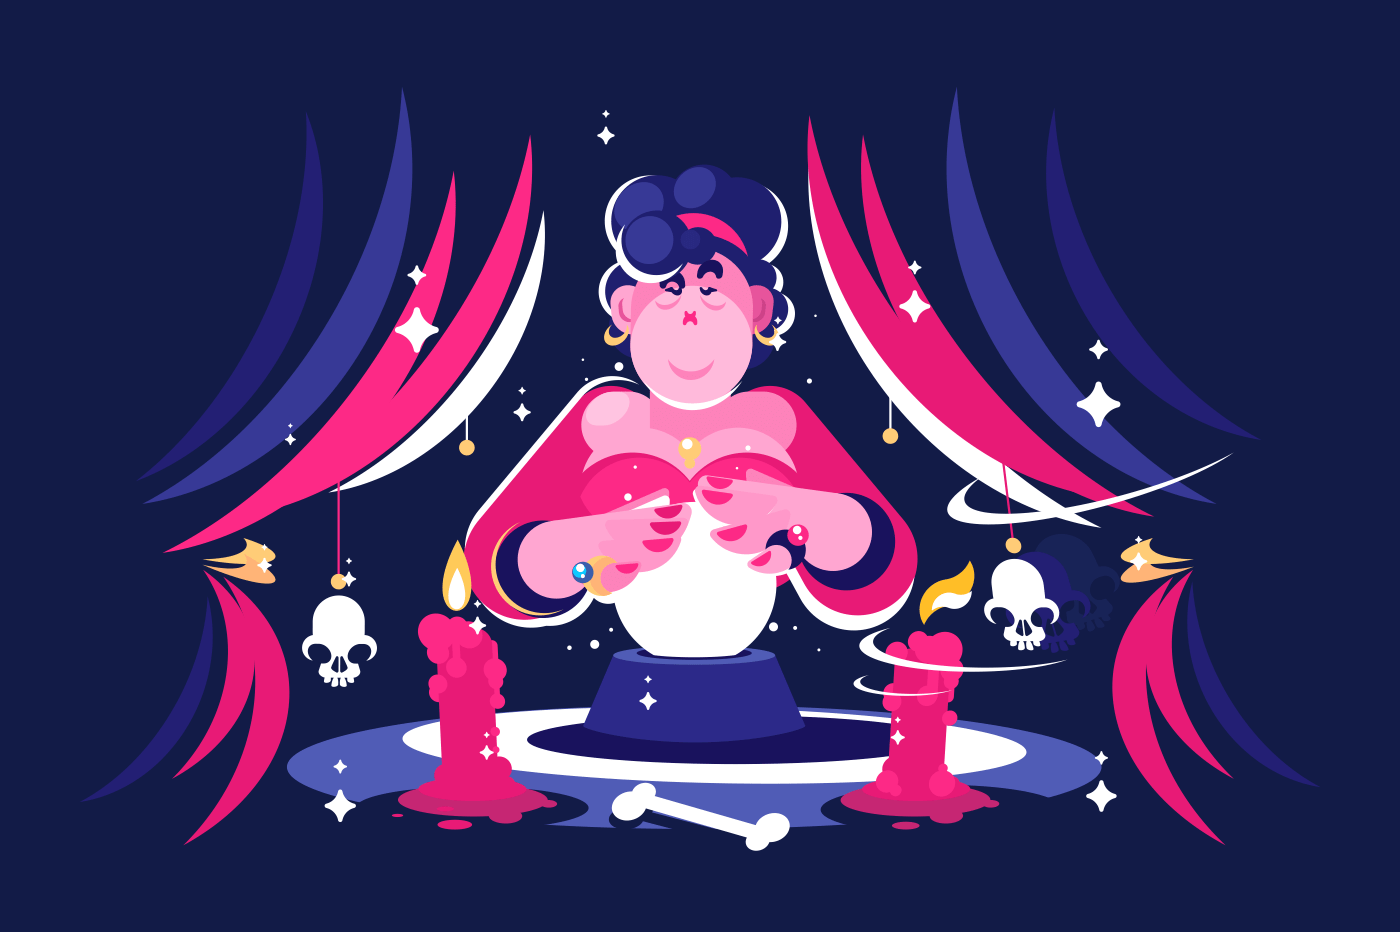 Woman fortune teller with magical crystal ball reading future in dark room. Flat. Vector illustration.